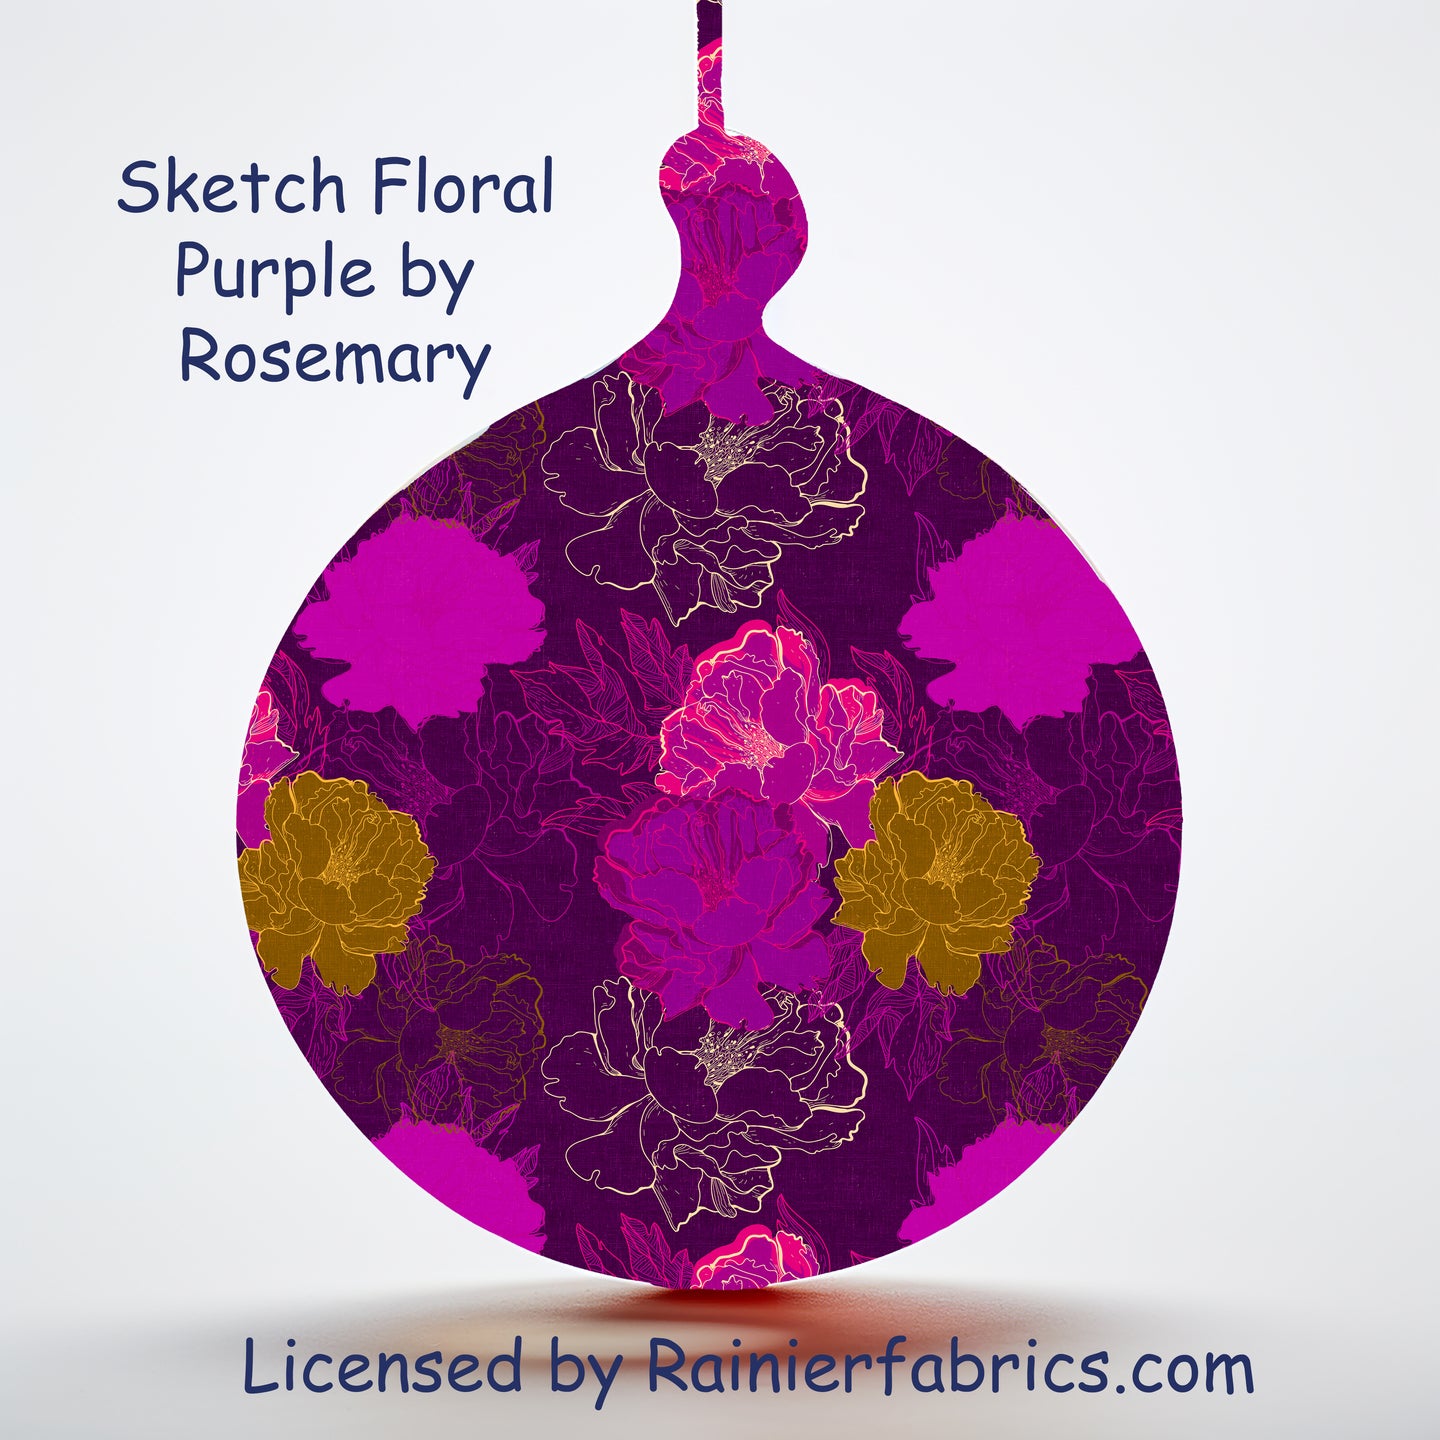 Sketch Floral Purple by Rosemary